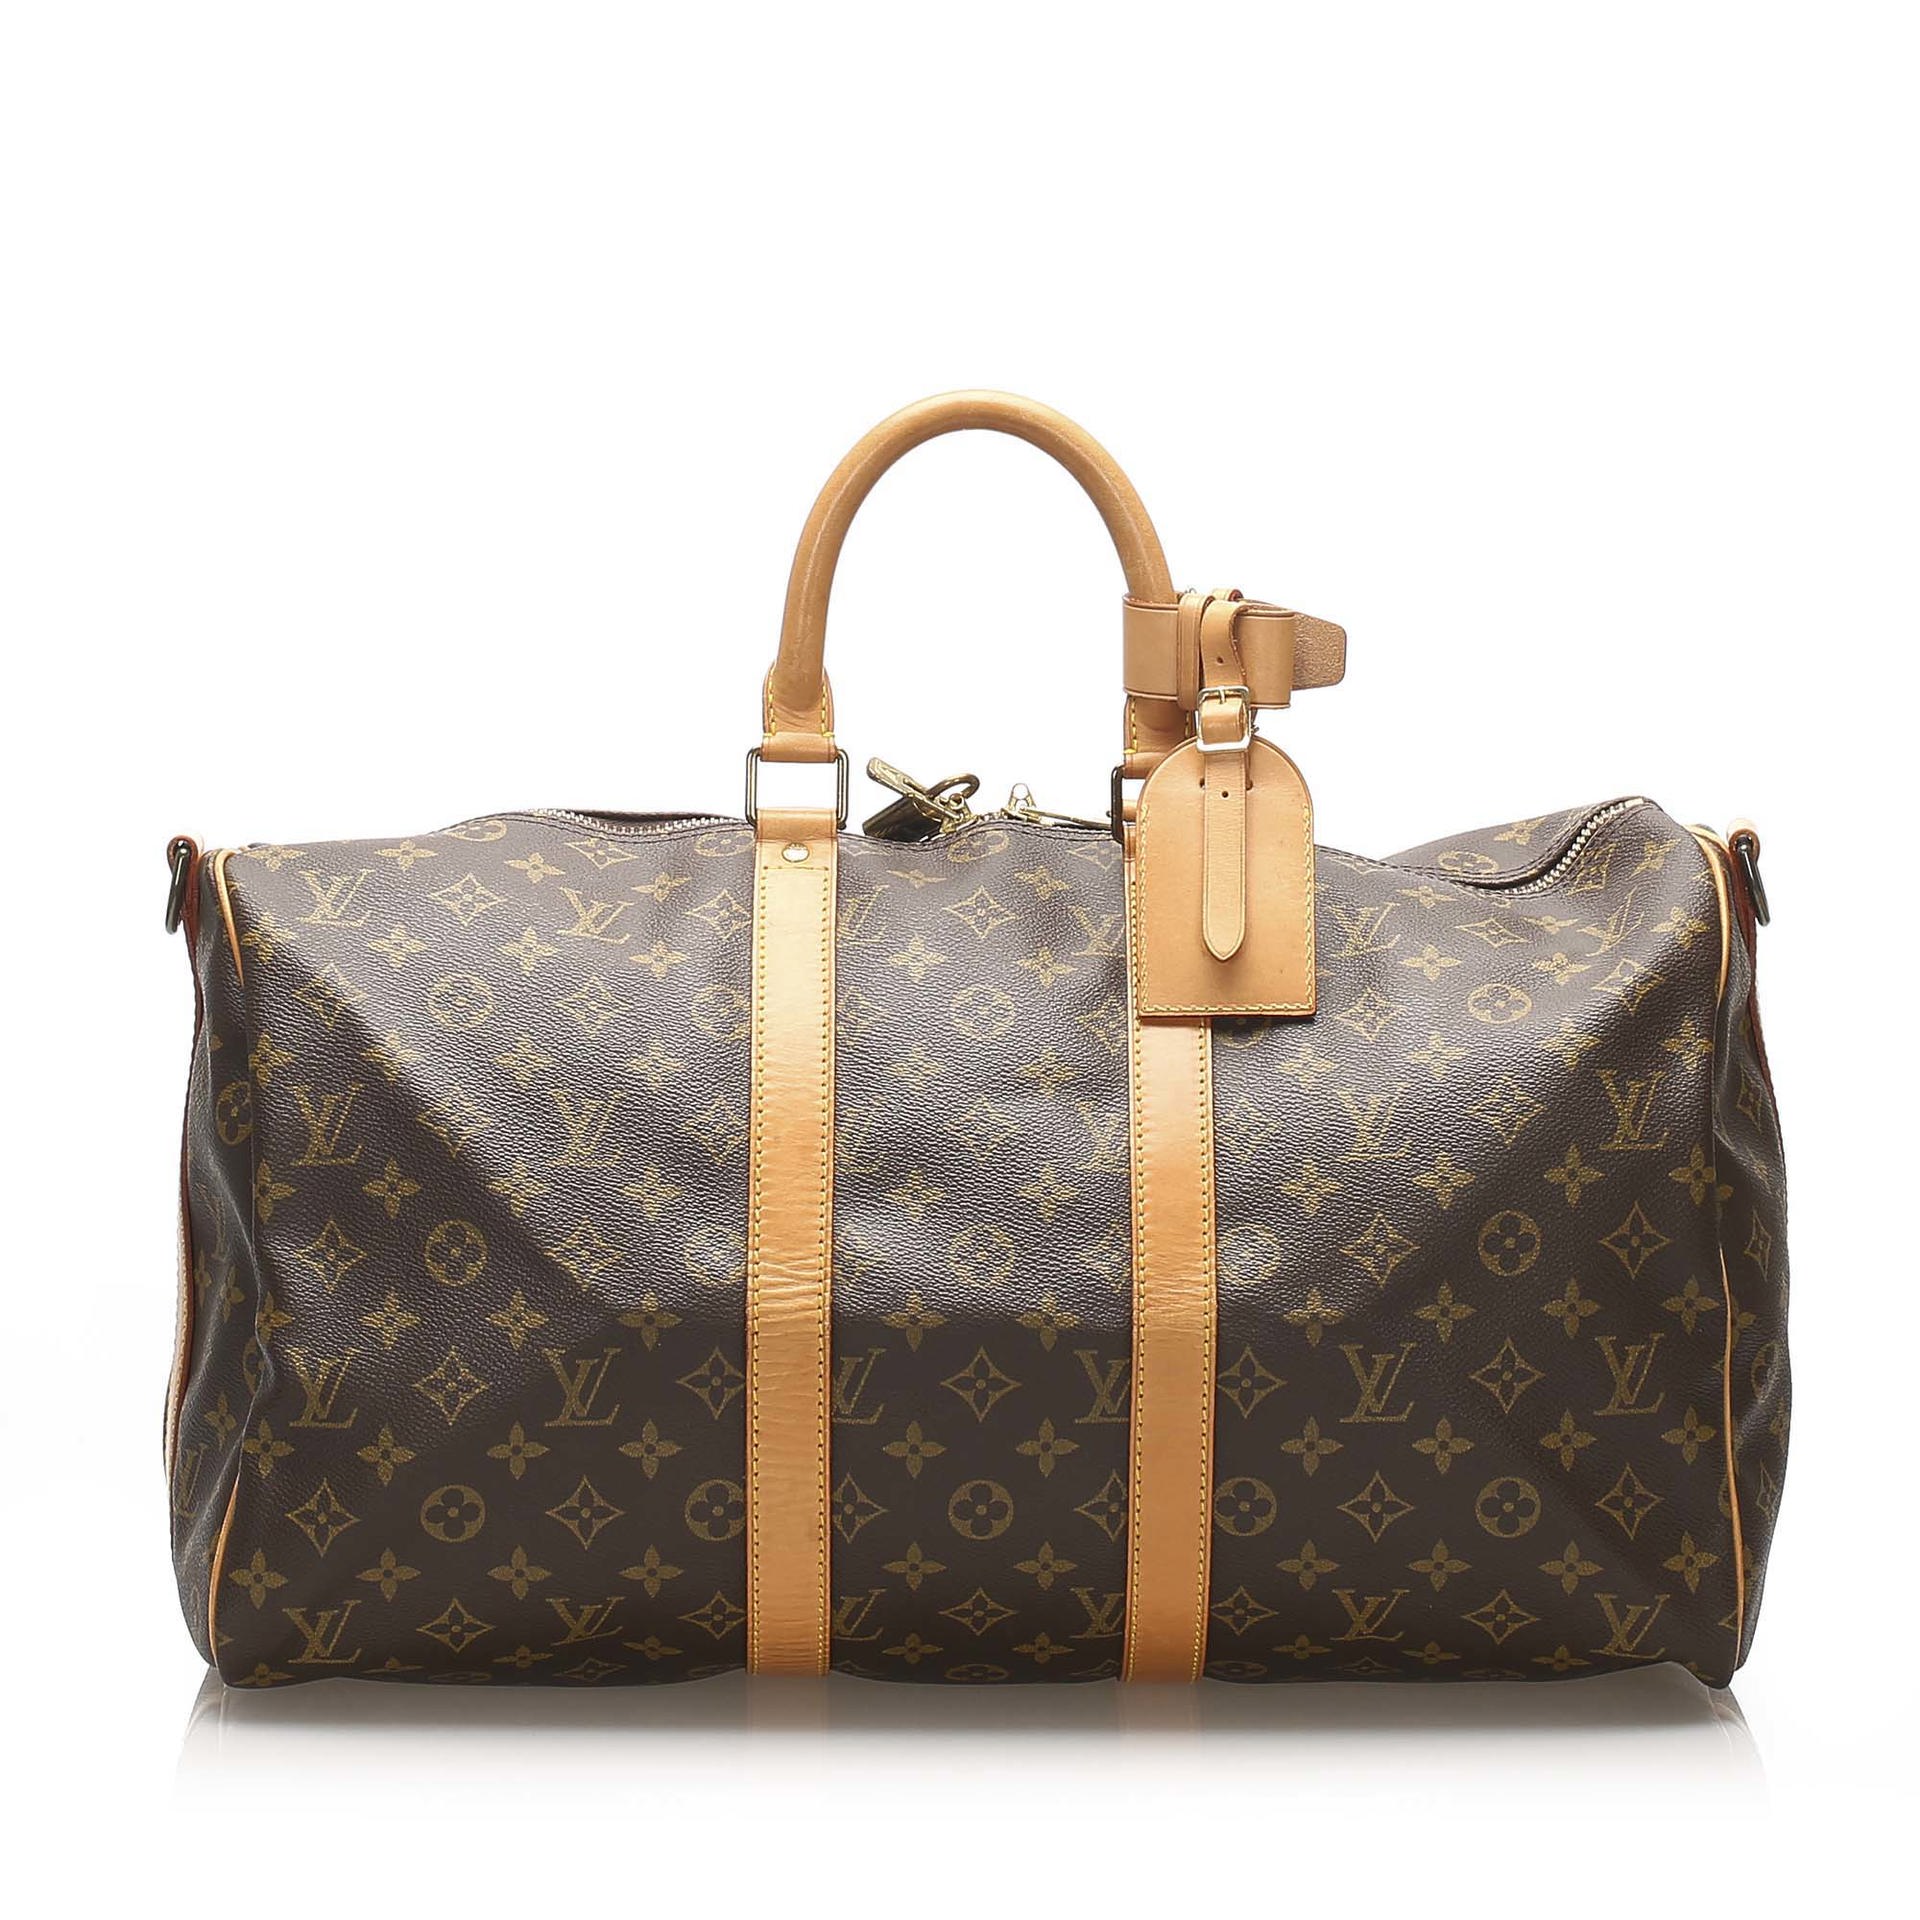 What Is Louis Vuitton Employee Discount